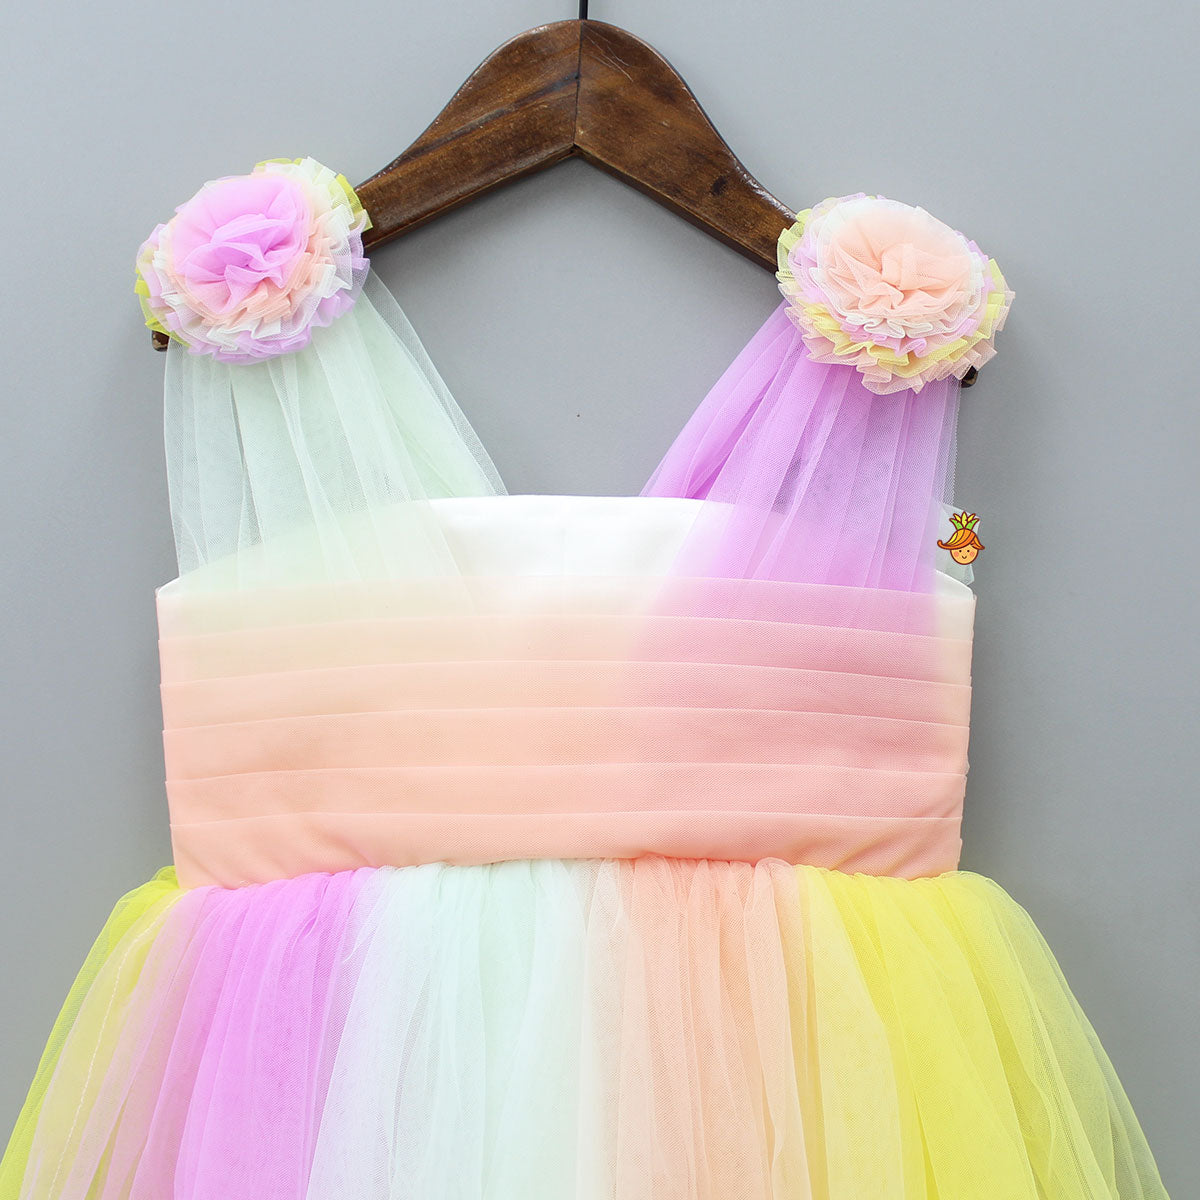 2021 Hot Selling Baby Wear Girls Party Garment Ball Gown Princess Frock  Lace Sweet Dress 5 Colors - China Baby Wear and Party Dress price |  Made-in-China.com